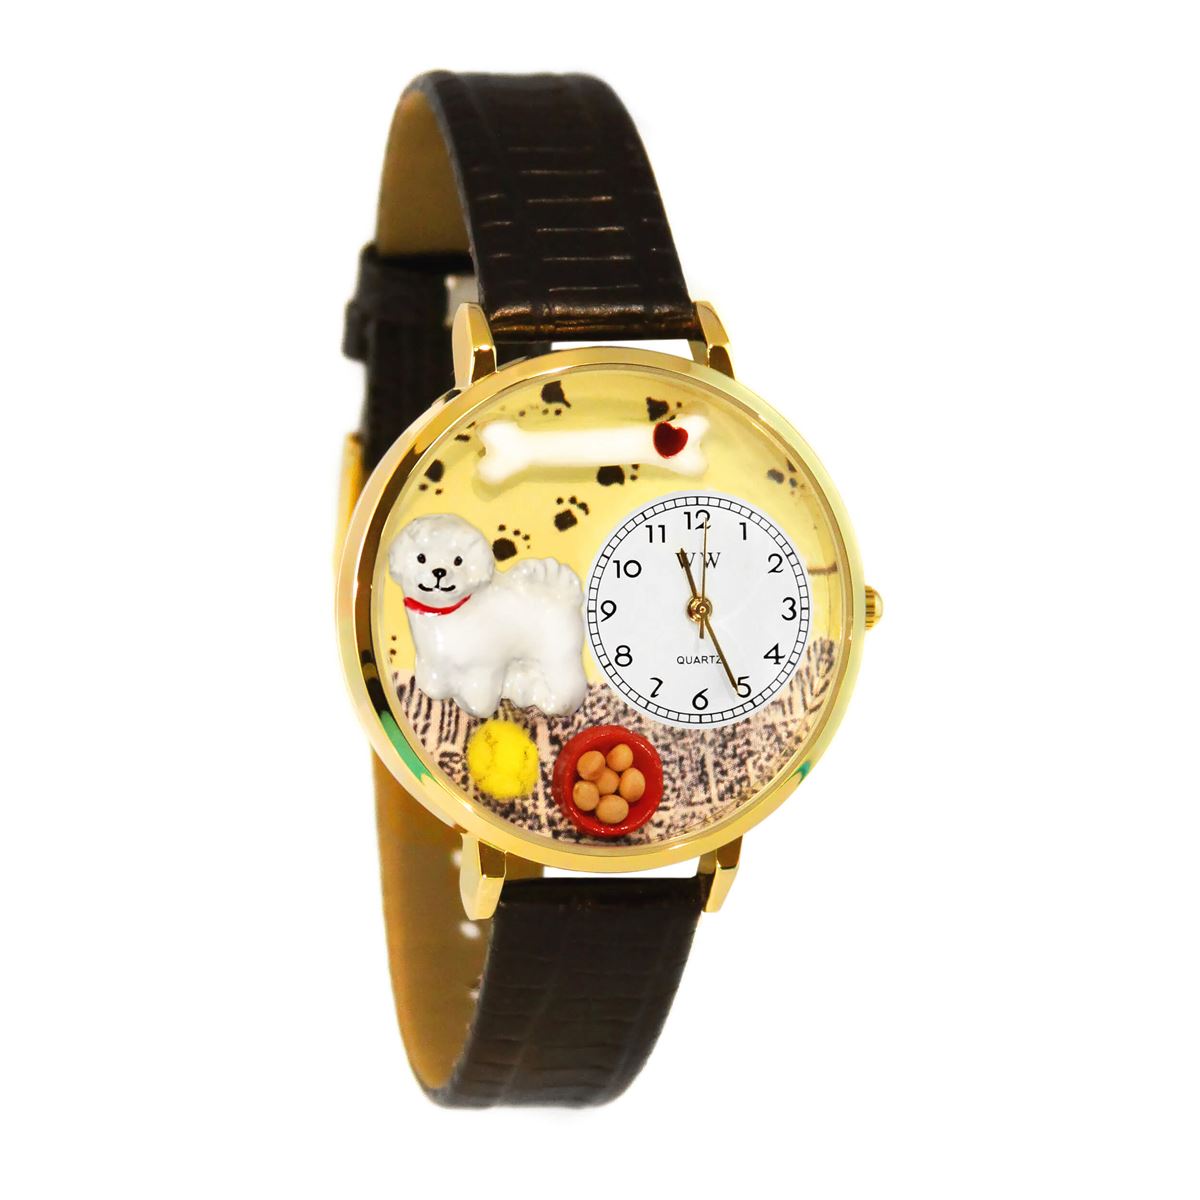 Whimsical Gifts | Bichon 3D Watch Large Style | Handmade in USA | Animal Lover | Dog Lover | Novelty Unique Fun Miniatures Gift | Gold Finish Black Leather Watch Band